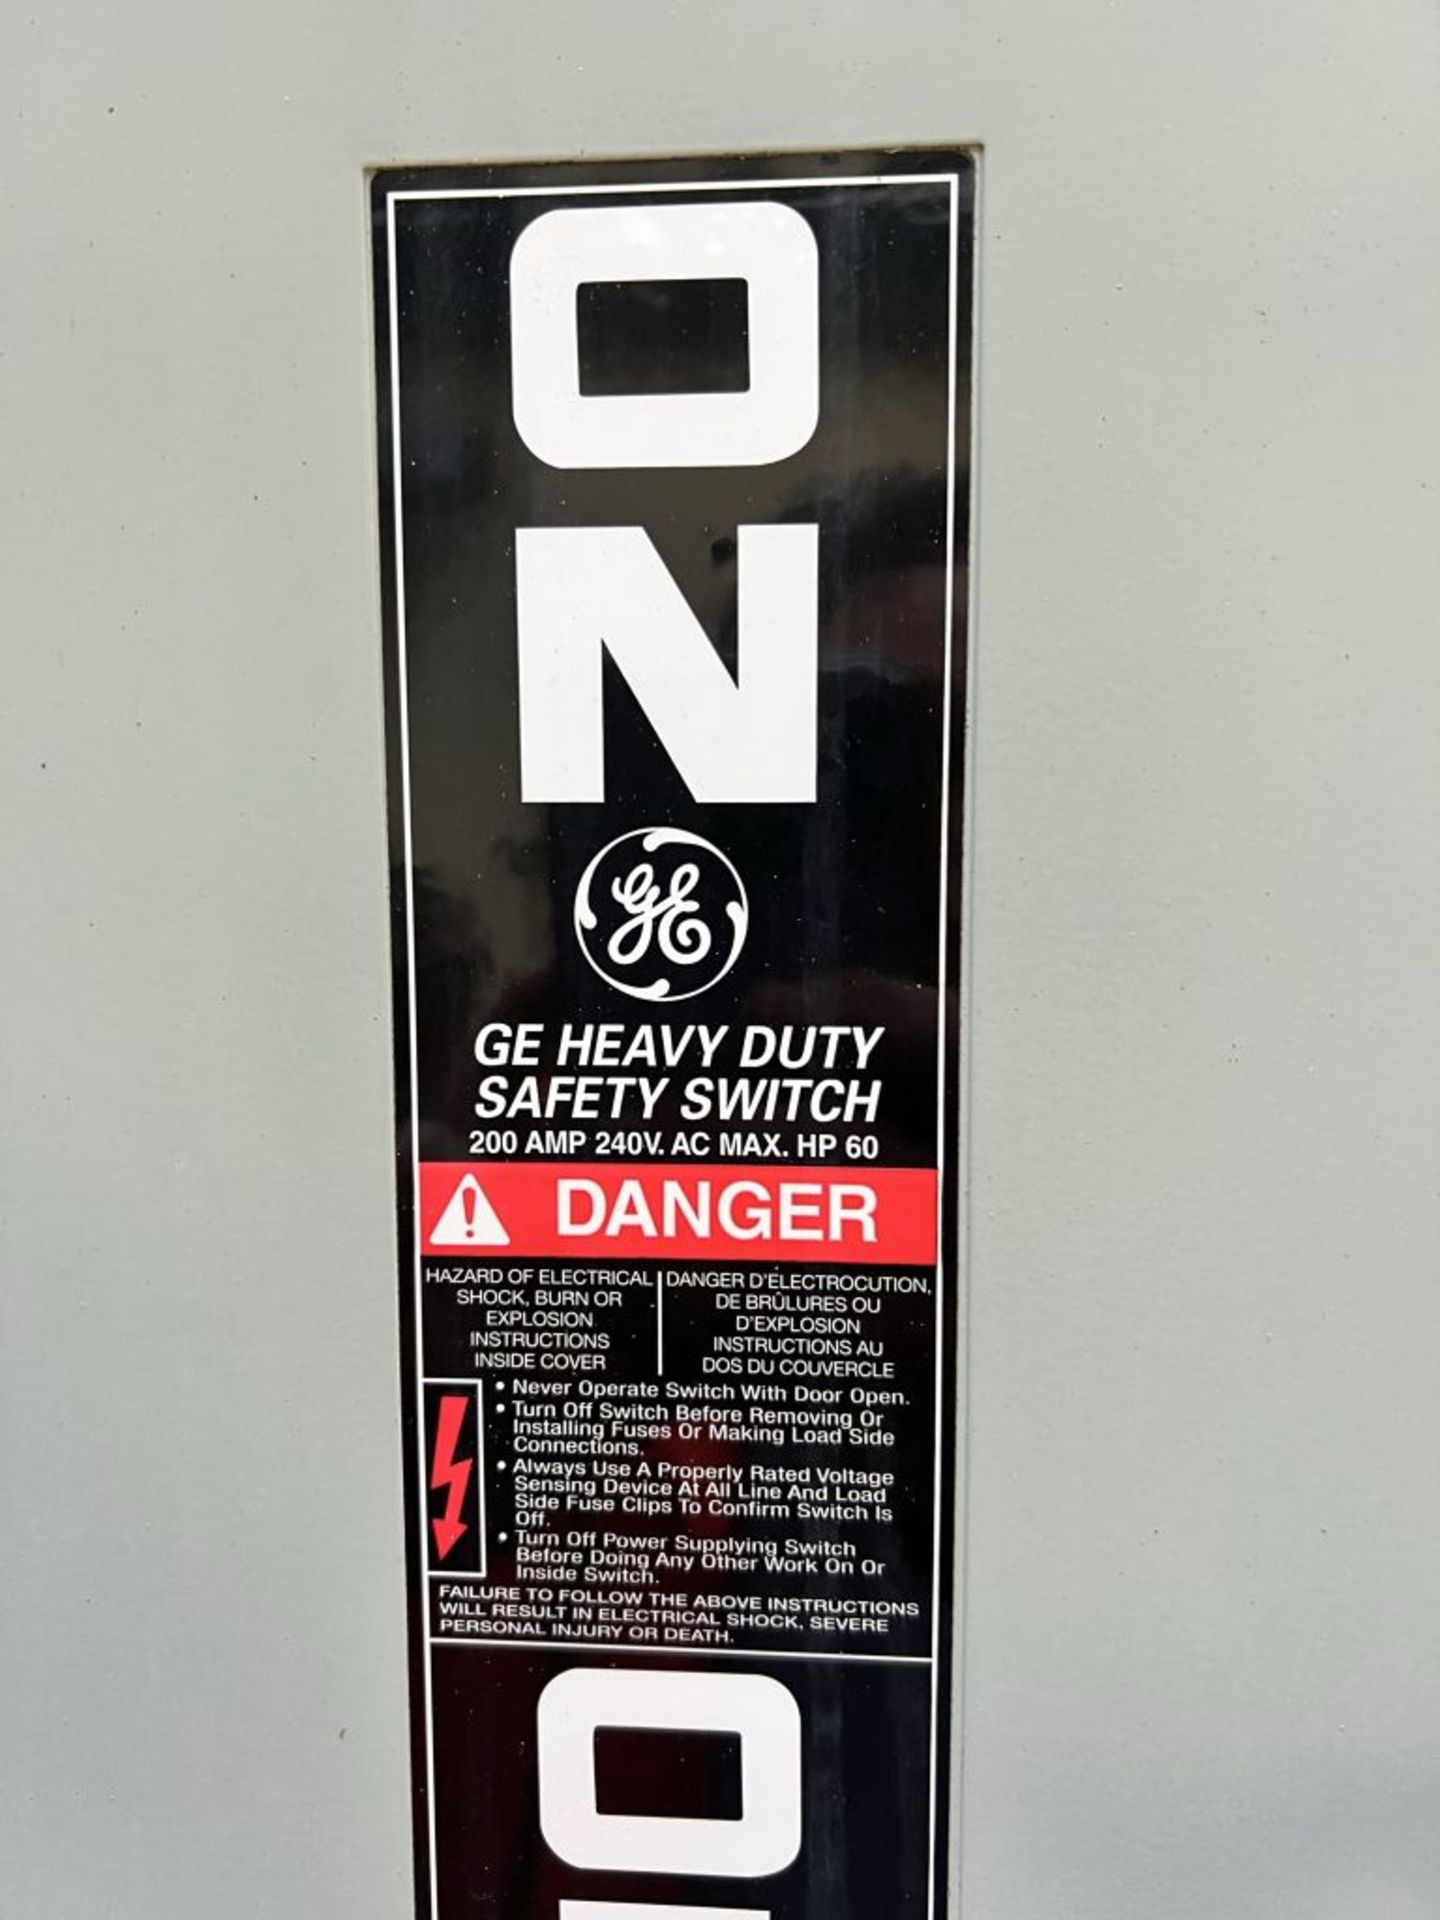 Spartanburg, SC - GE Heavy Duty Safety Switch - Image 2 of 5